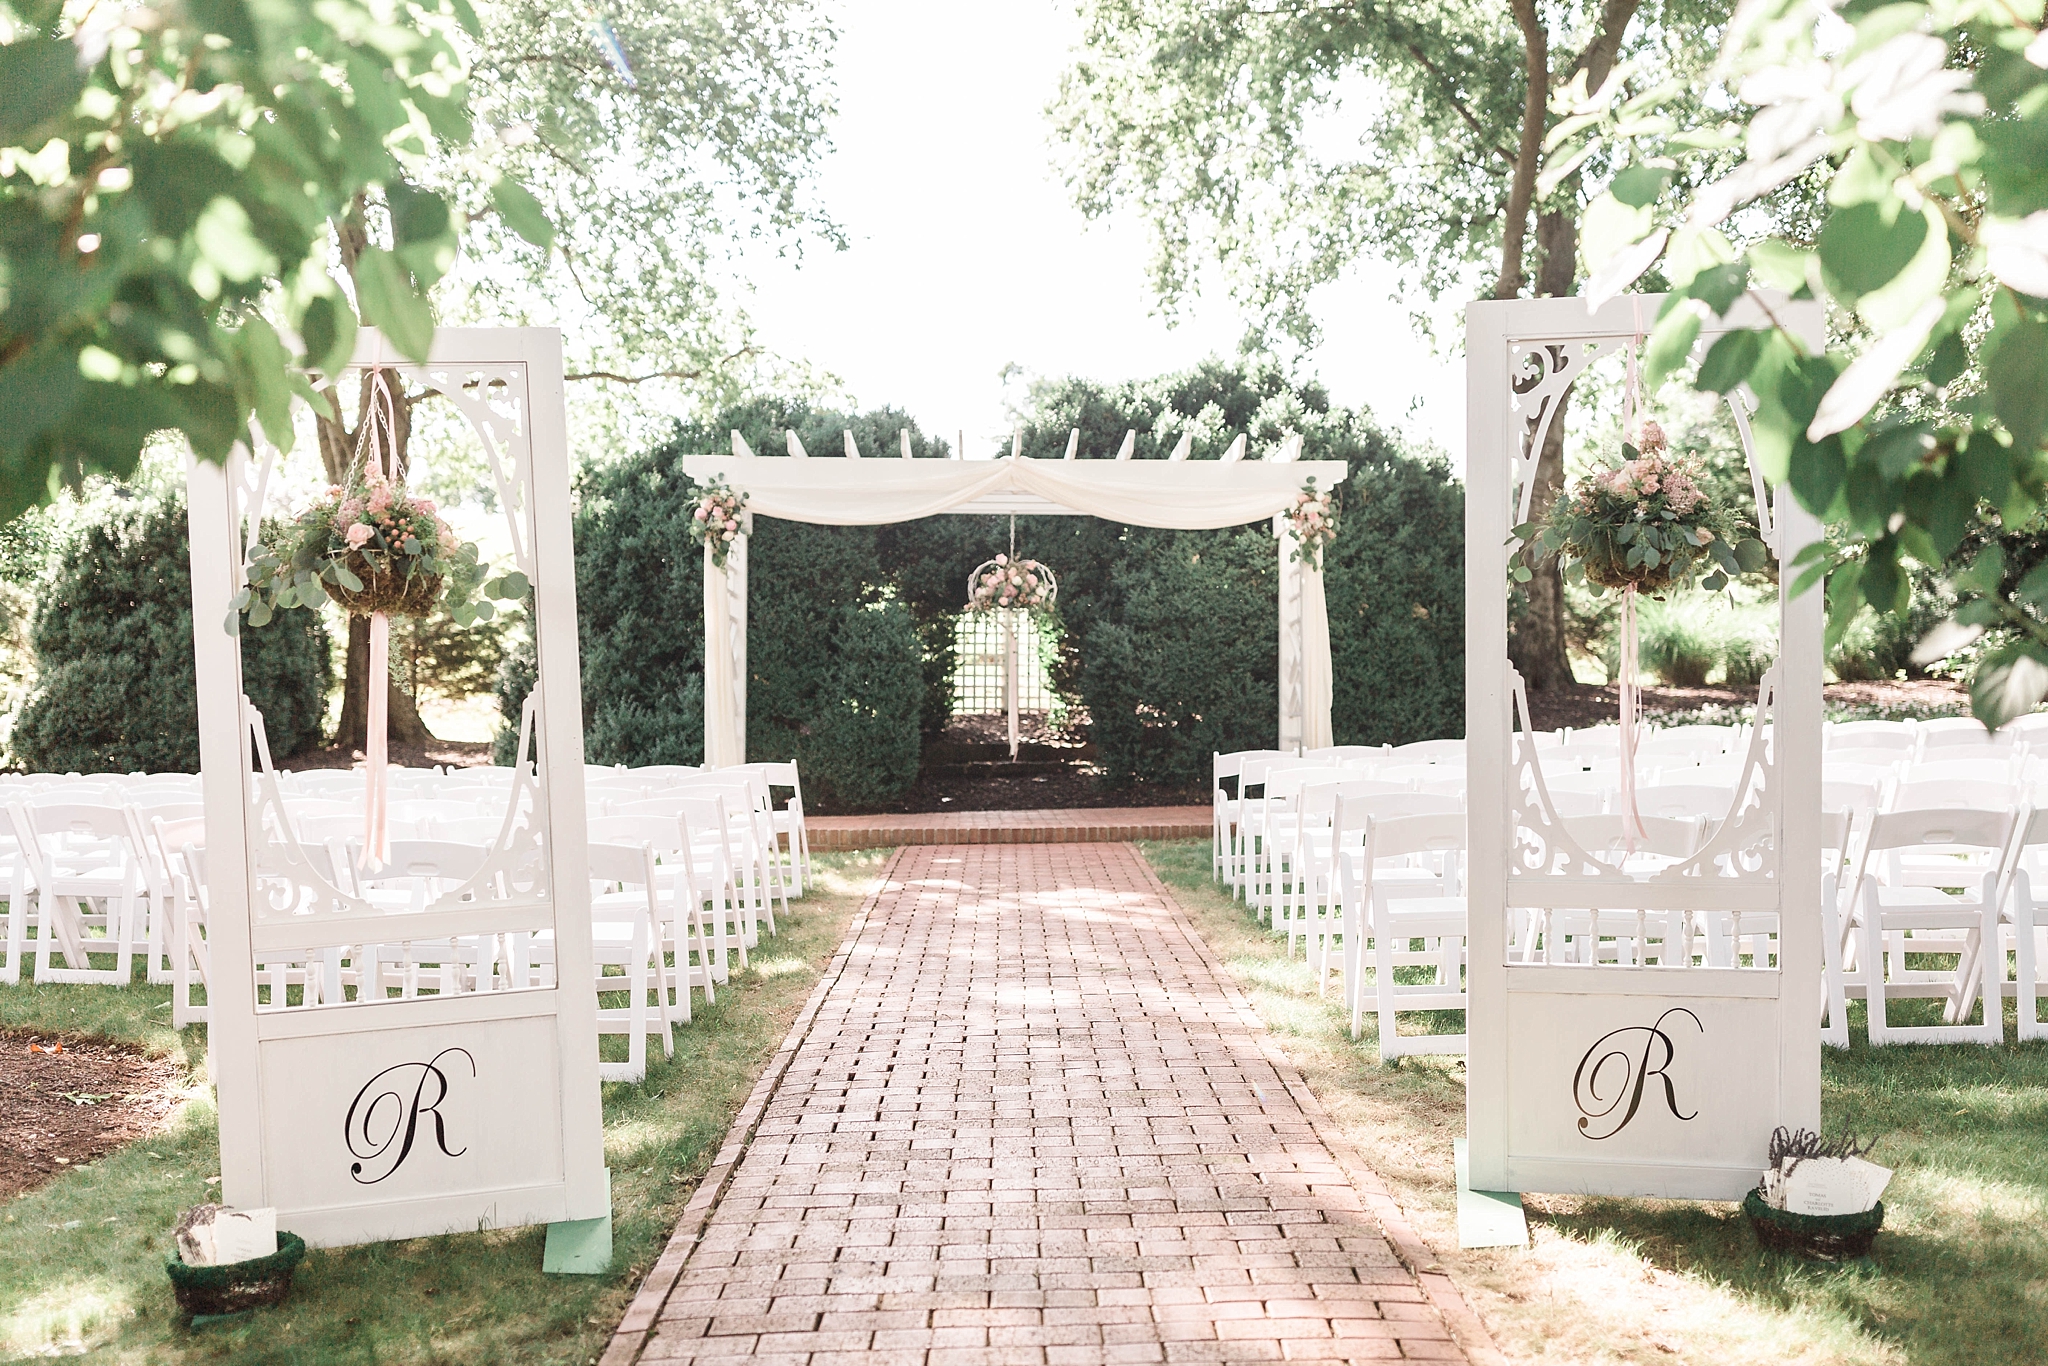 This Inn at Willow Grove Wedding in Orange, VA features a travel themed affair as a nod to the bride and groom's guests from across the world!